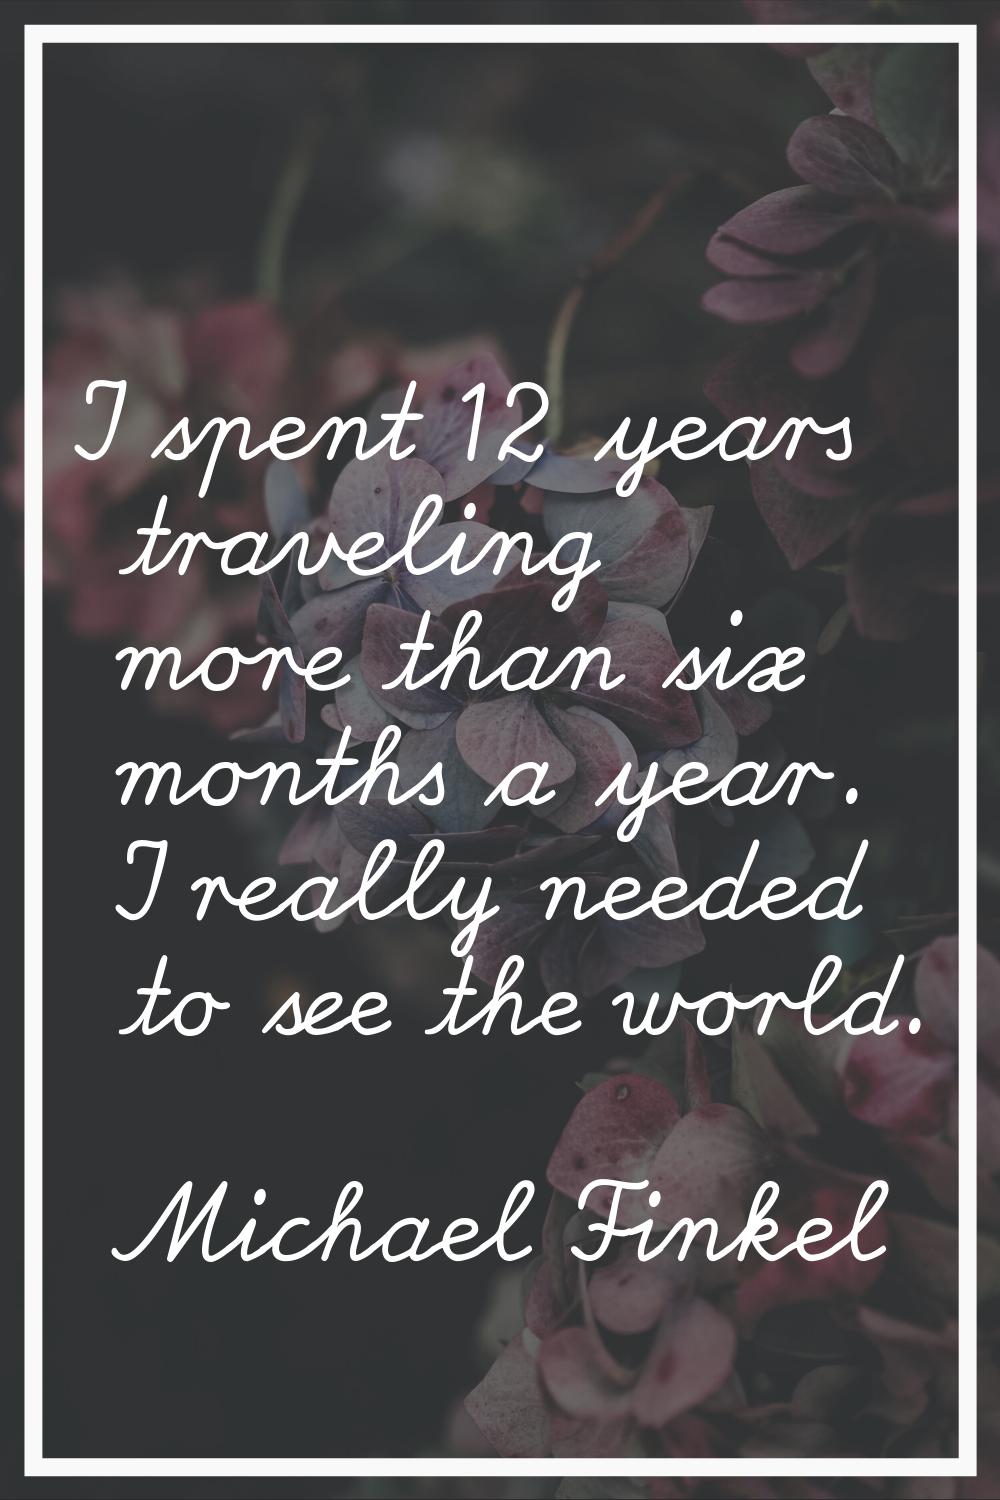 I spent 12 years traveling more than six months a year. I really needed to see the world.